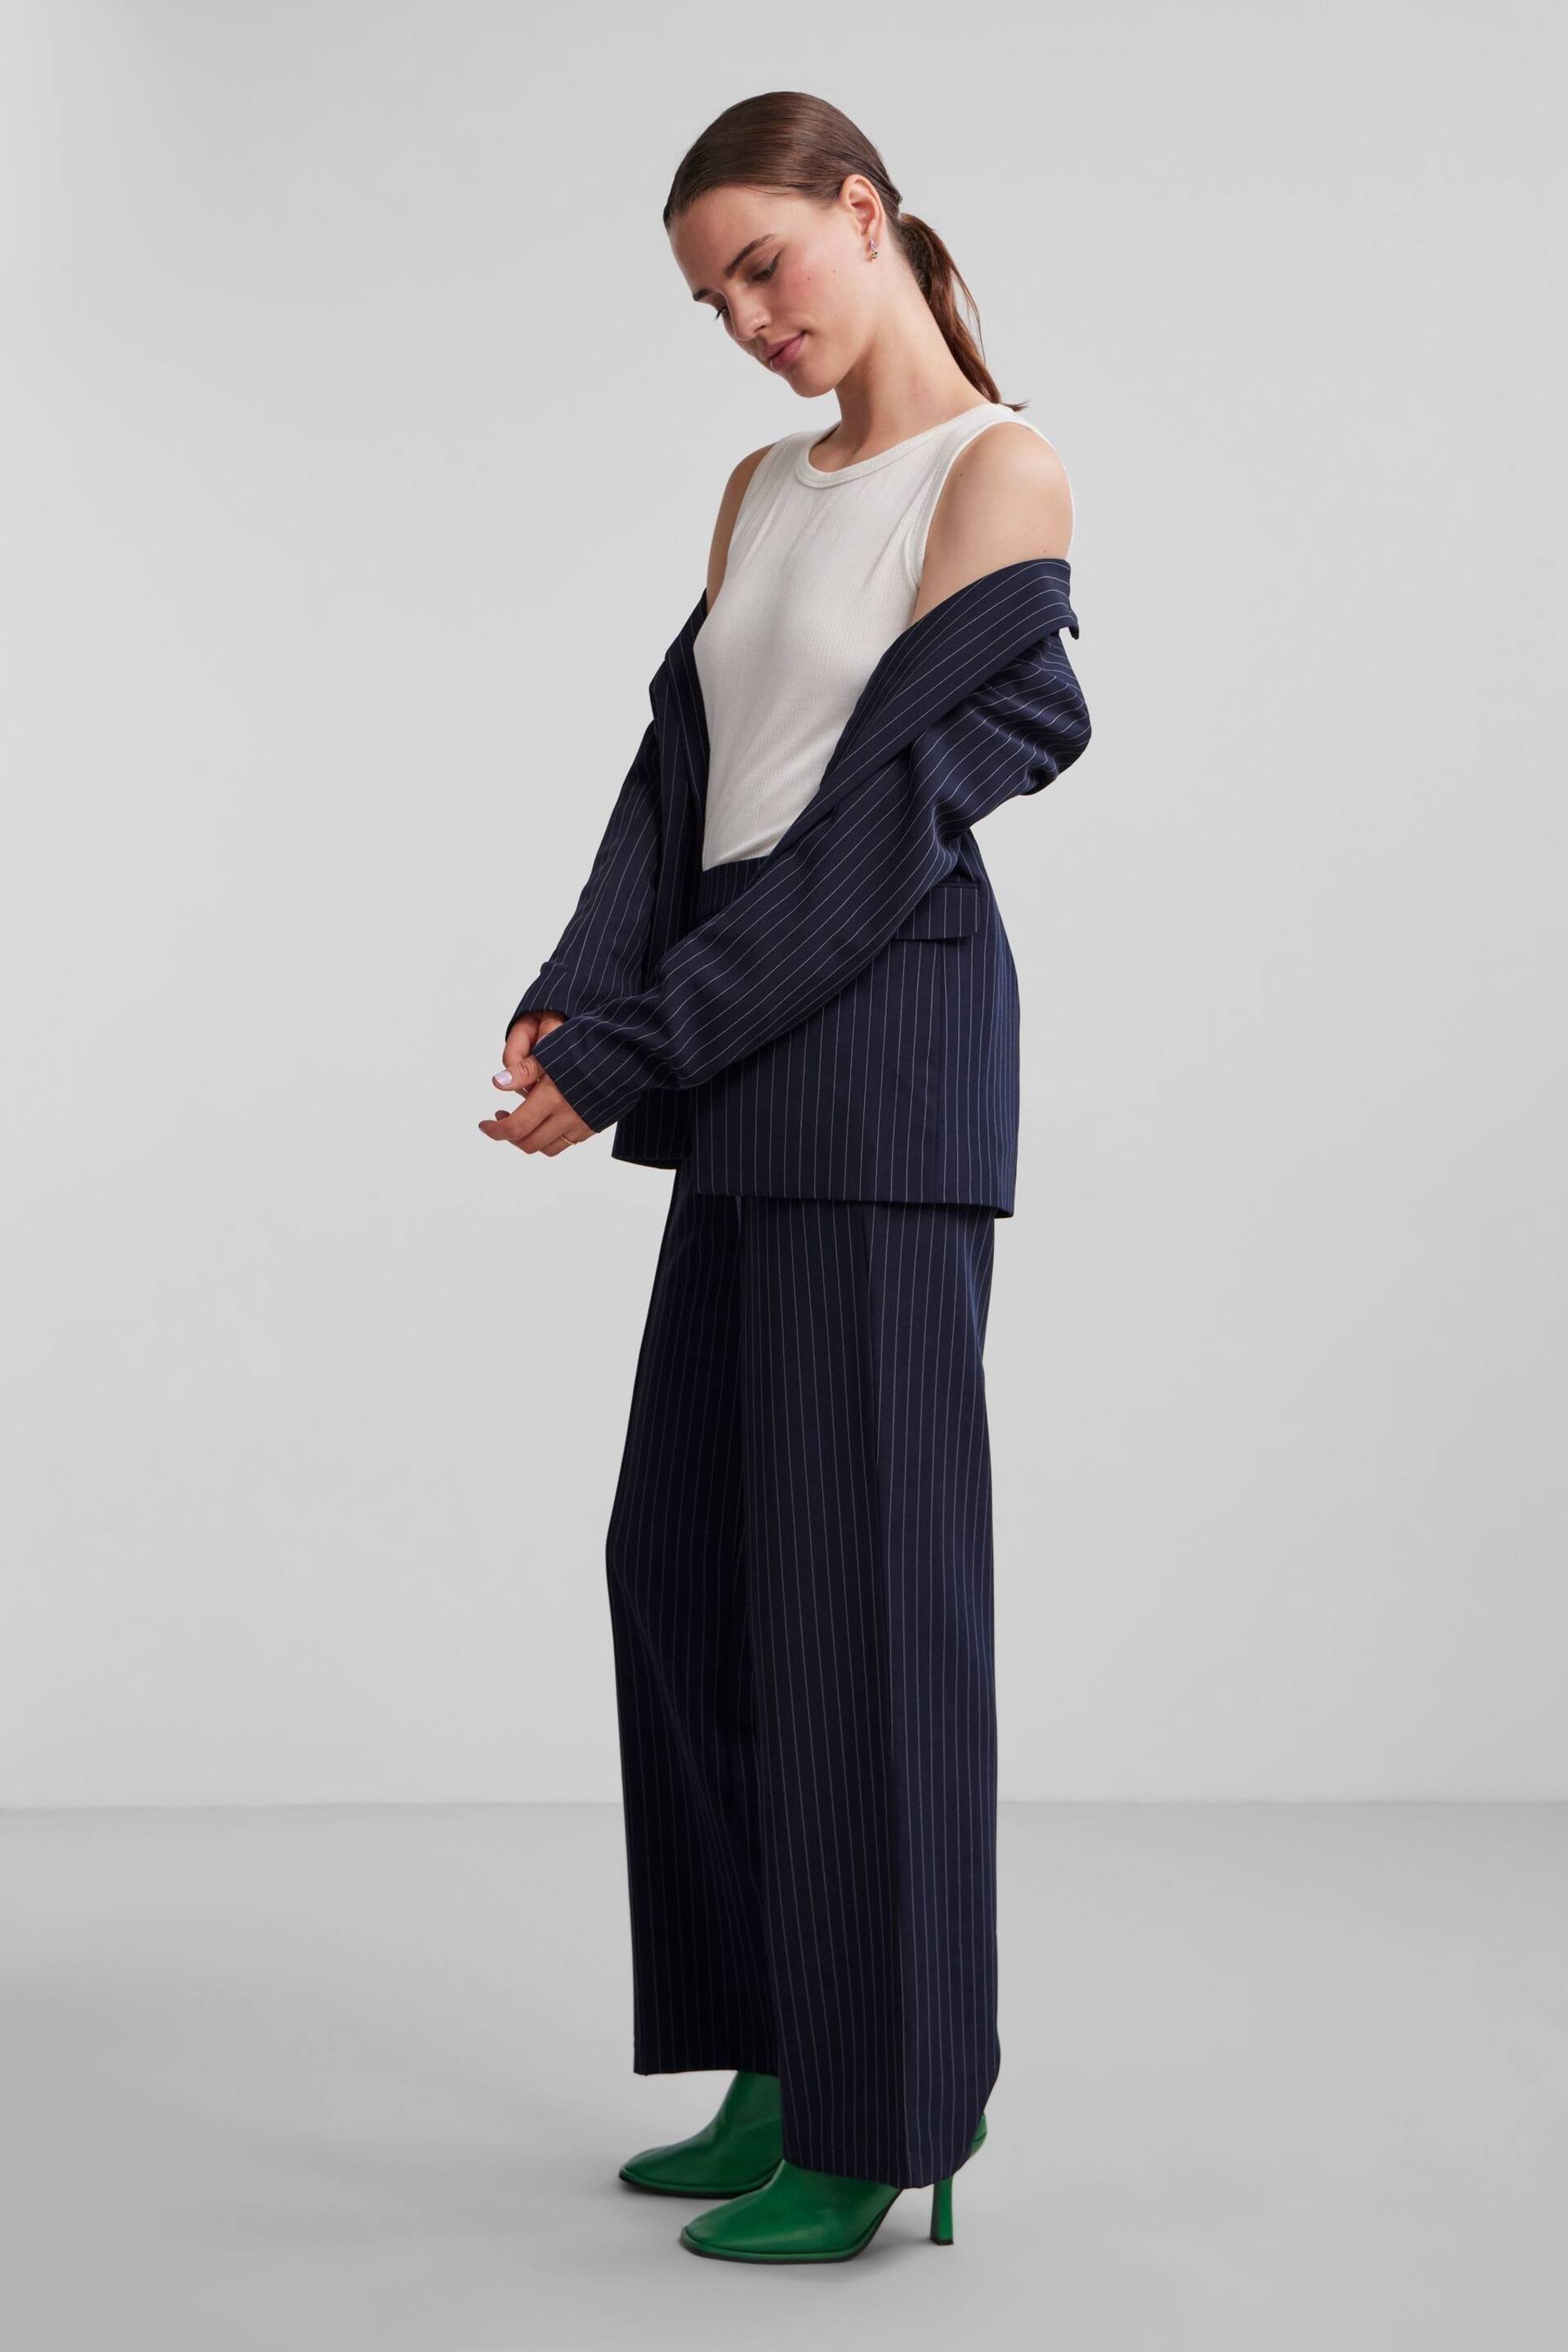 PIECES Blue Pinstripe Relaxed Fit Stretch Blazer - Image 4 of 6